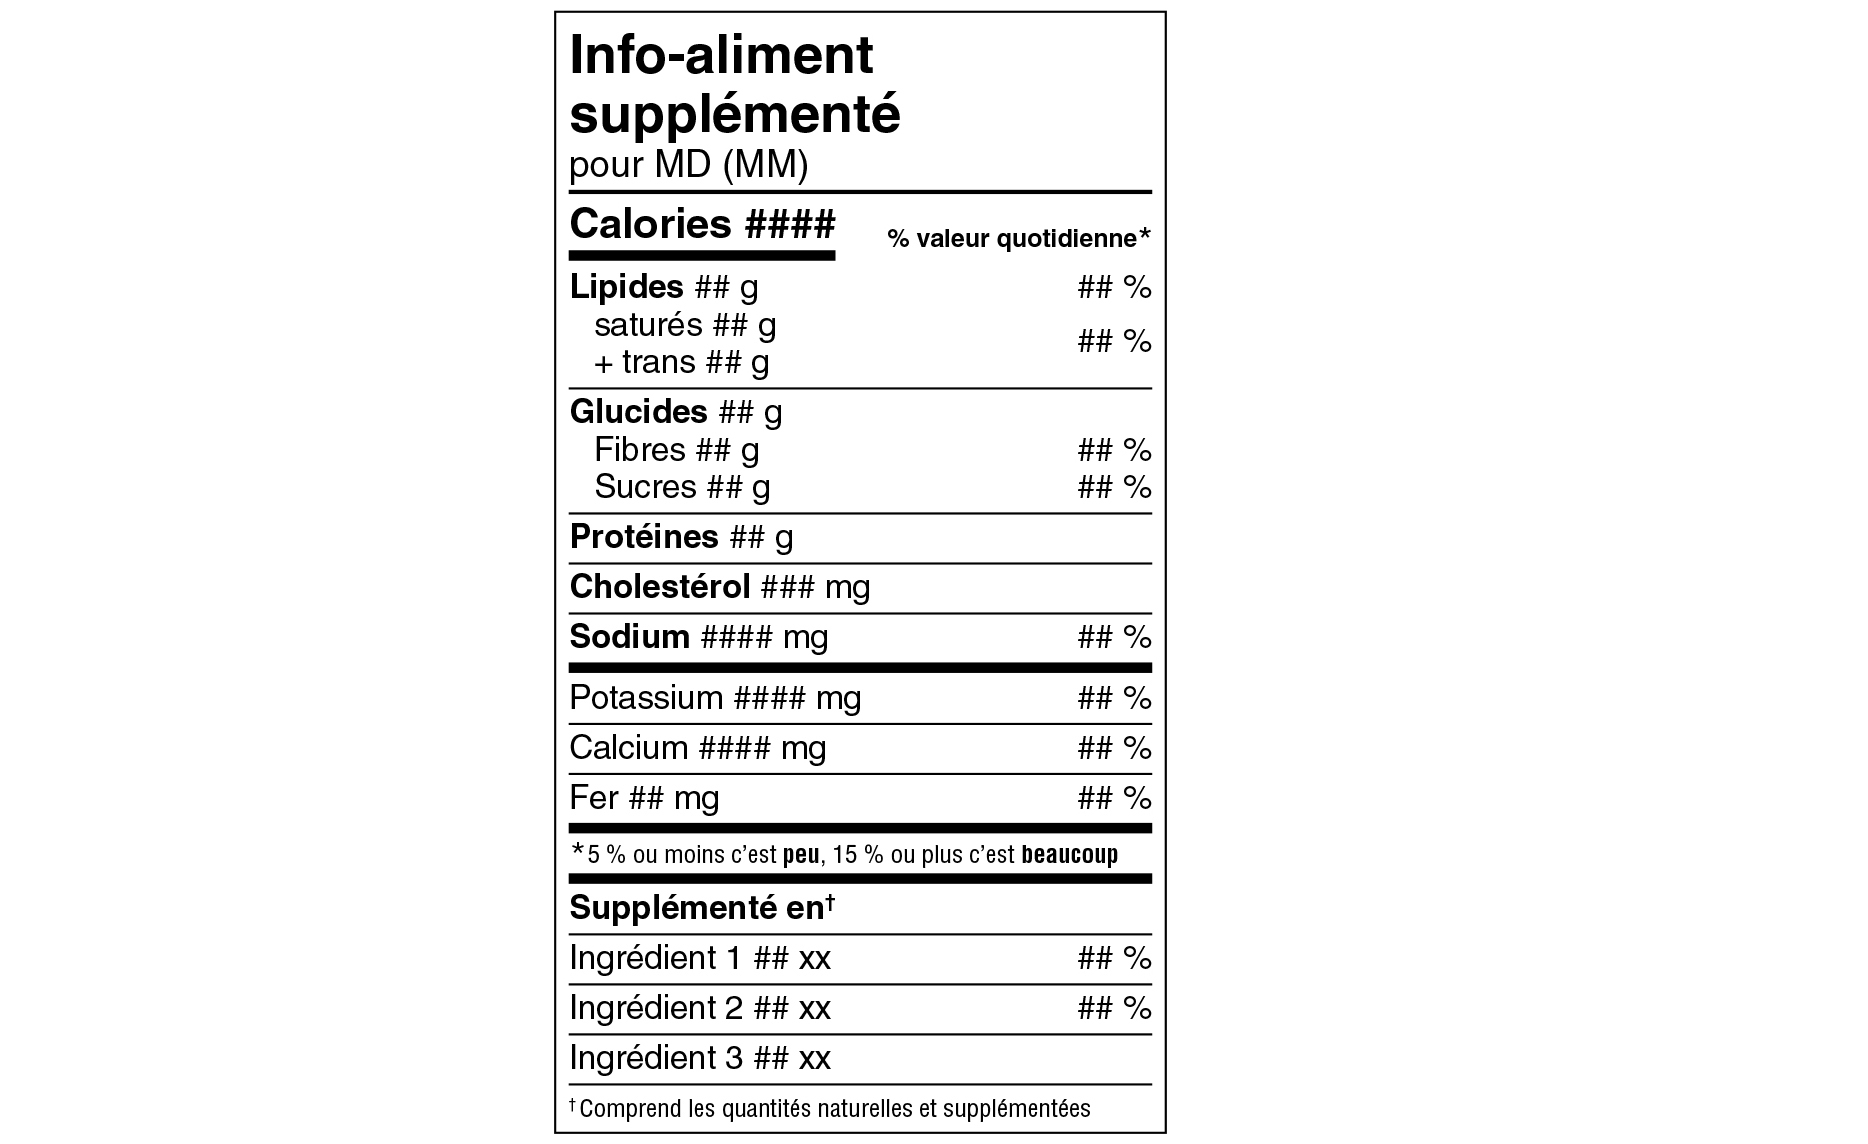 A French Supplemented Food Facts table in standard format surrounded by specifications. Text version below.